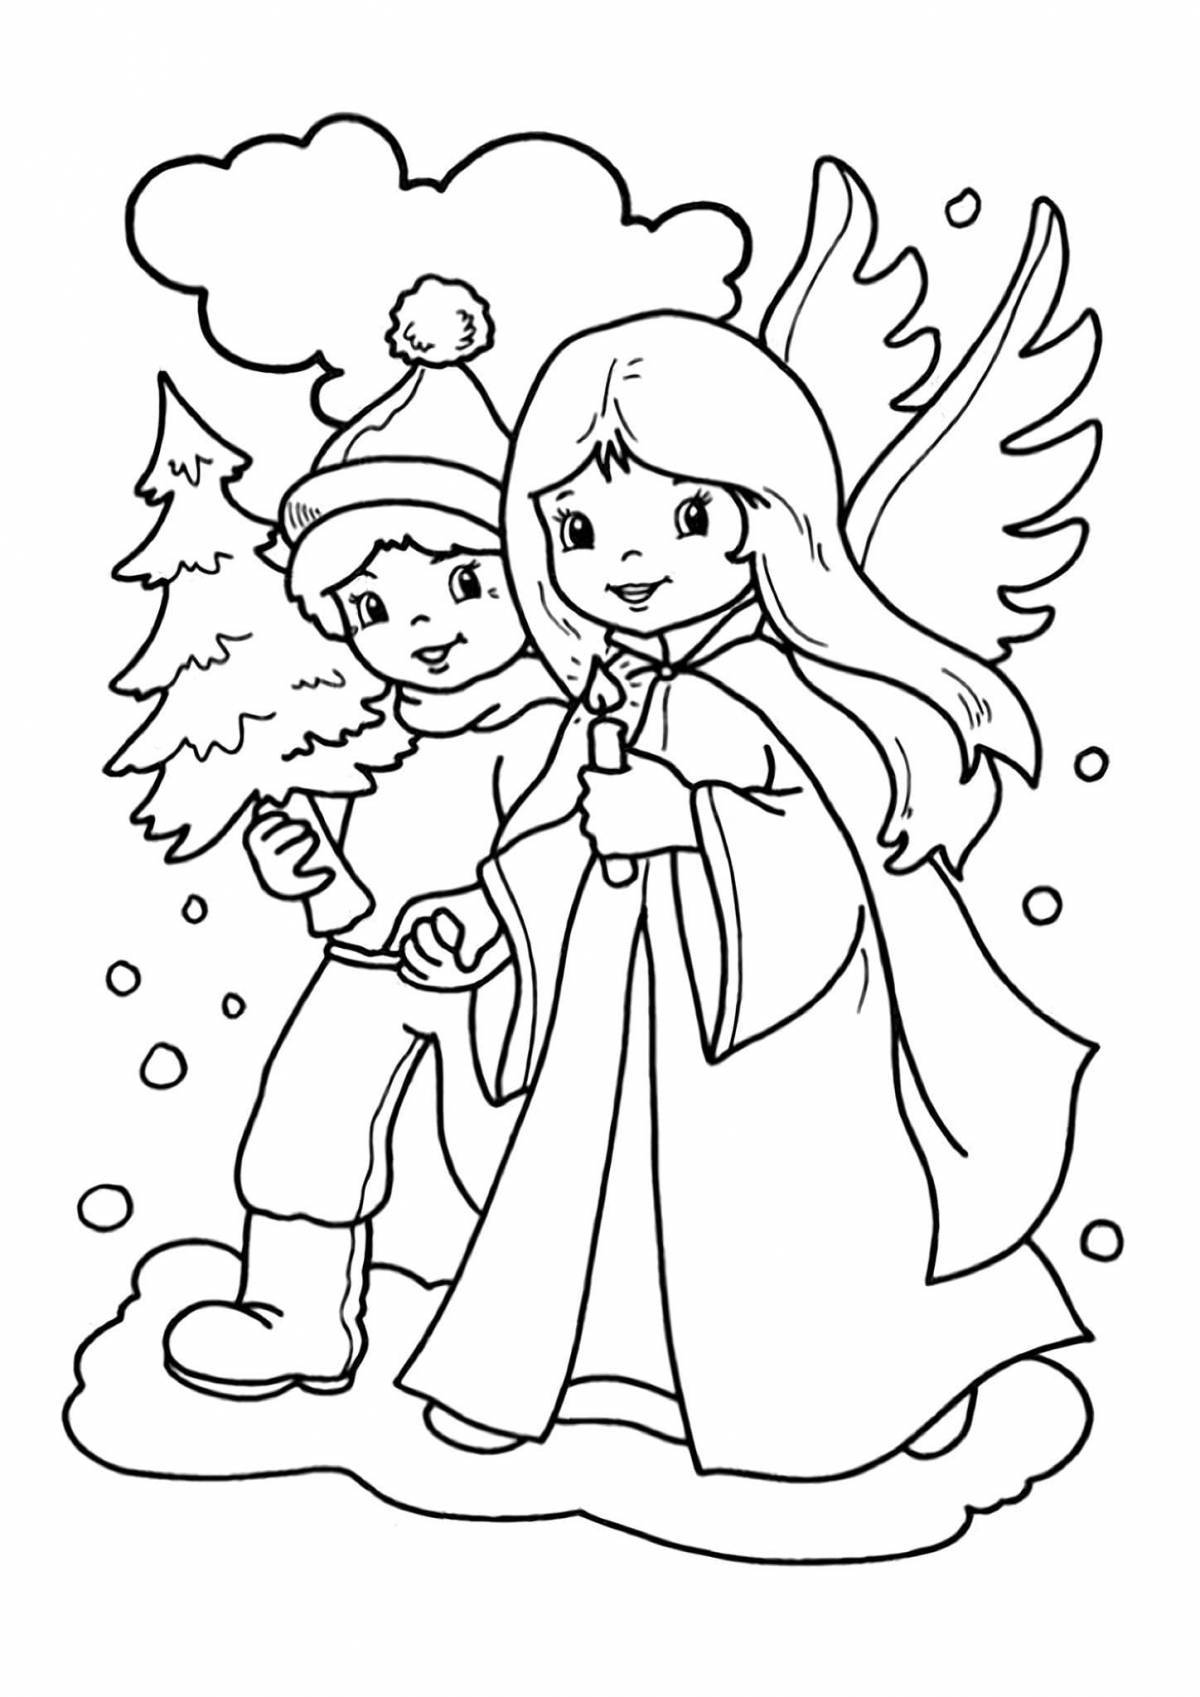 A fun Christmas coloring book for kids